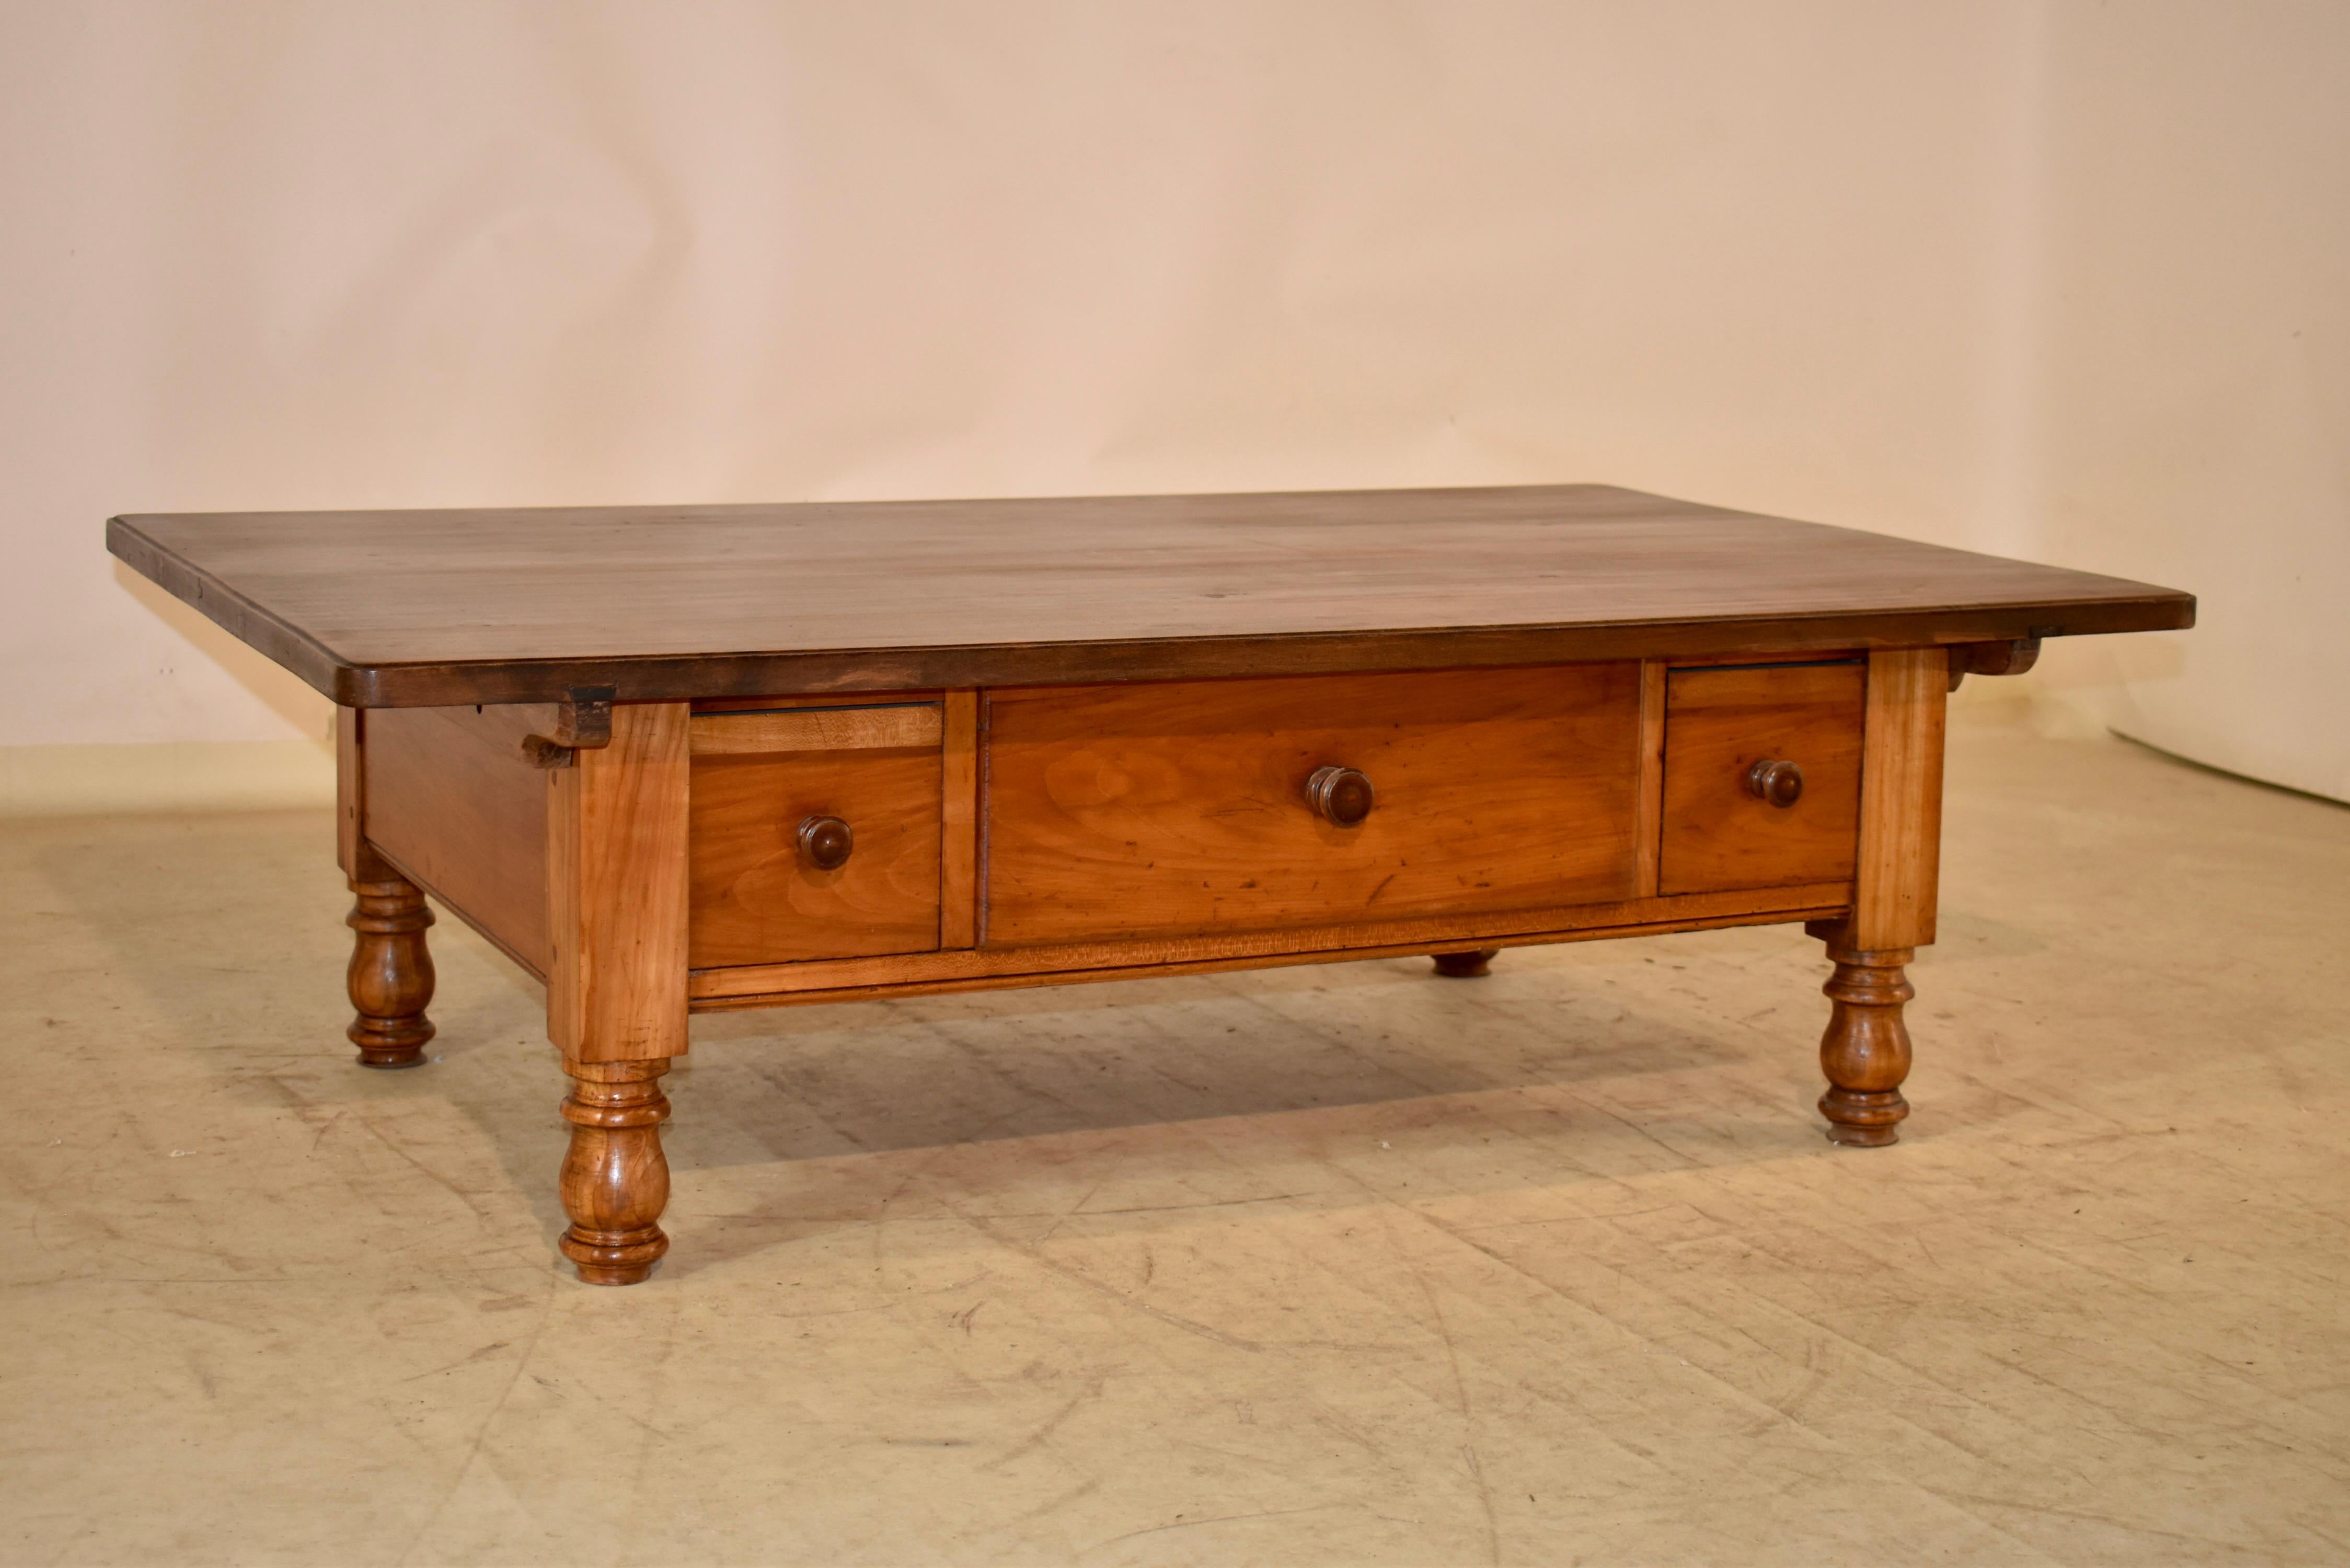 18th century Swiss coffee table made from cherry. The top is made from wide boards with wonderful graining and a beveled edge with chamfered corners. The apron is simple and has three drawers in the front. The table is supported on hand turned legs.